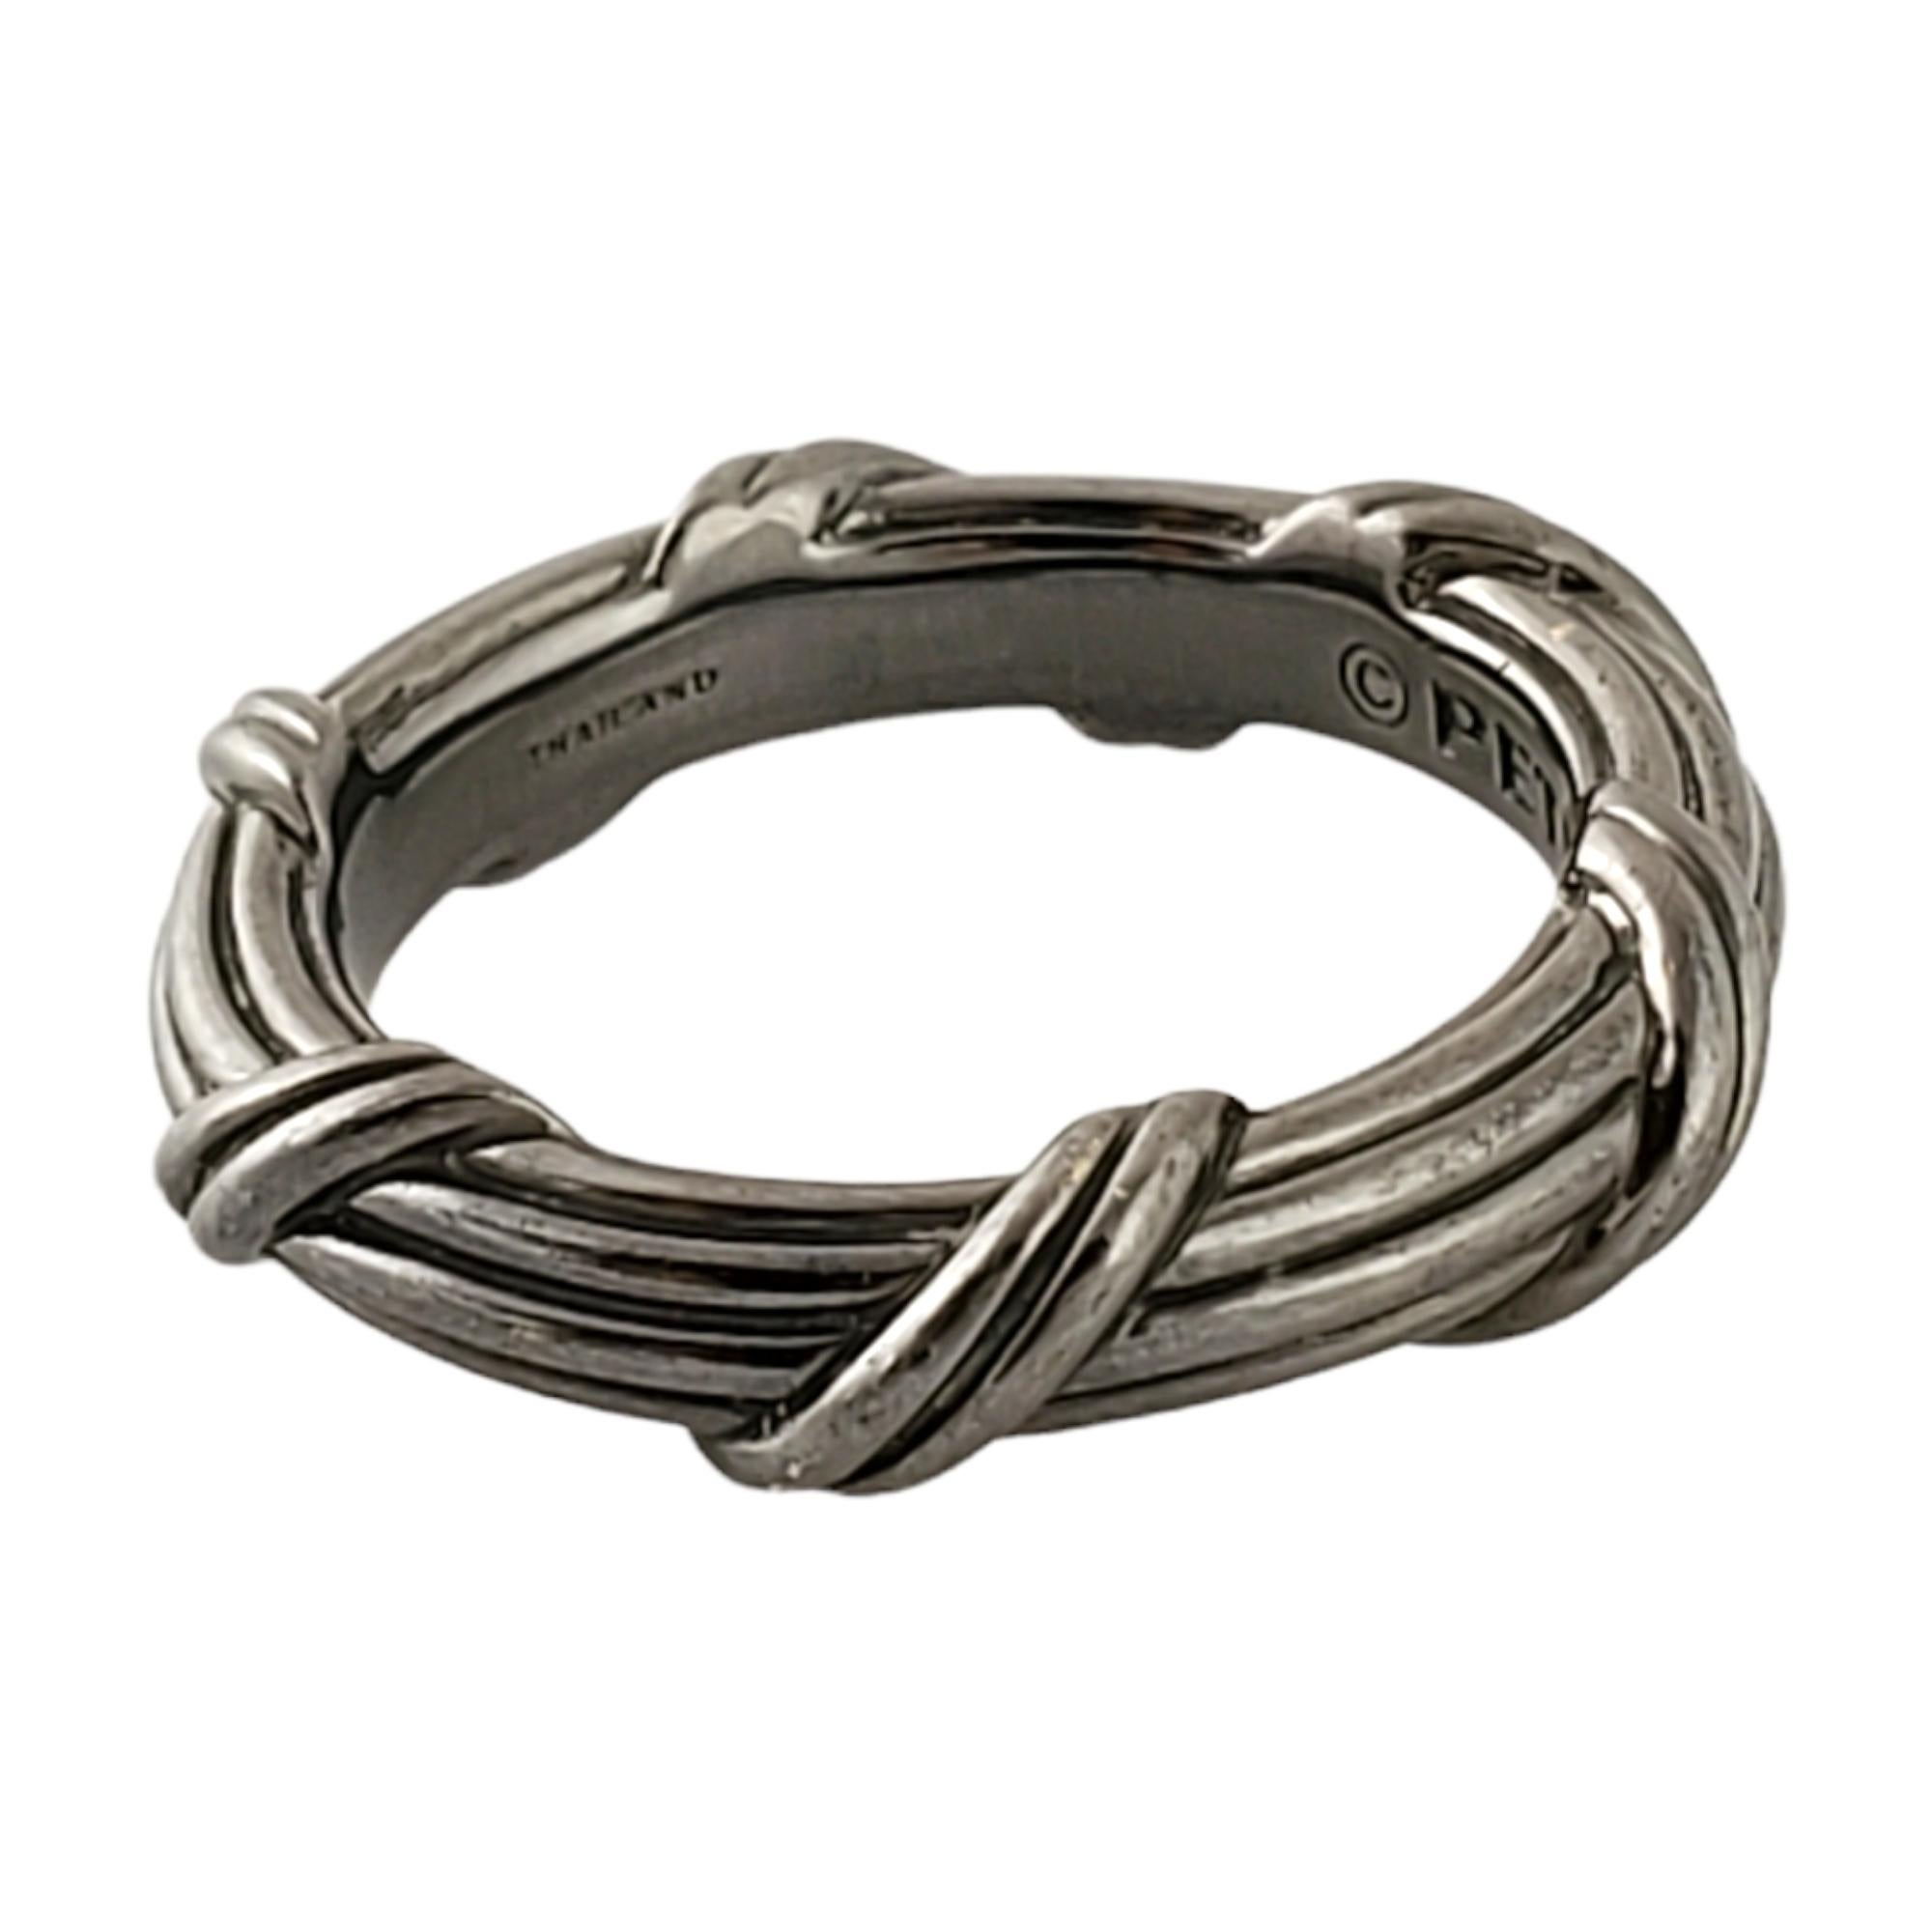 Sterling Silver Ribbon & Reed Signature Band Ring by Peter Thomas Roth

 Size 8

Peter Thomas Roth's classic band features a ribbon and reed design with an oxidized finish.

Weighs approx 7.5g, 4.8dwt

Marked ©PETER THOMAS ROTH 925 THAILAND

Very